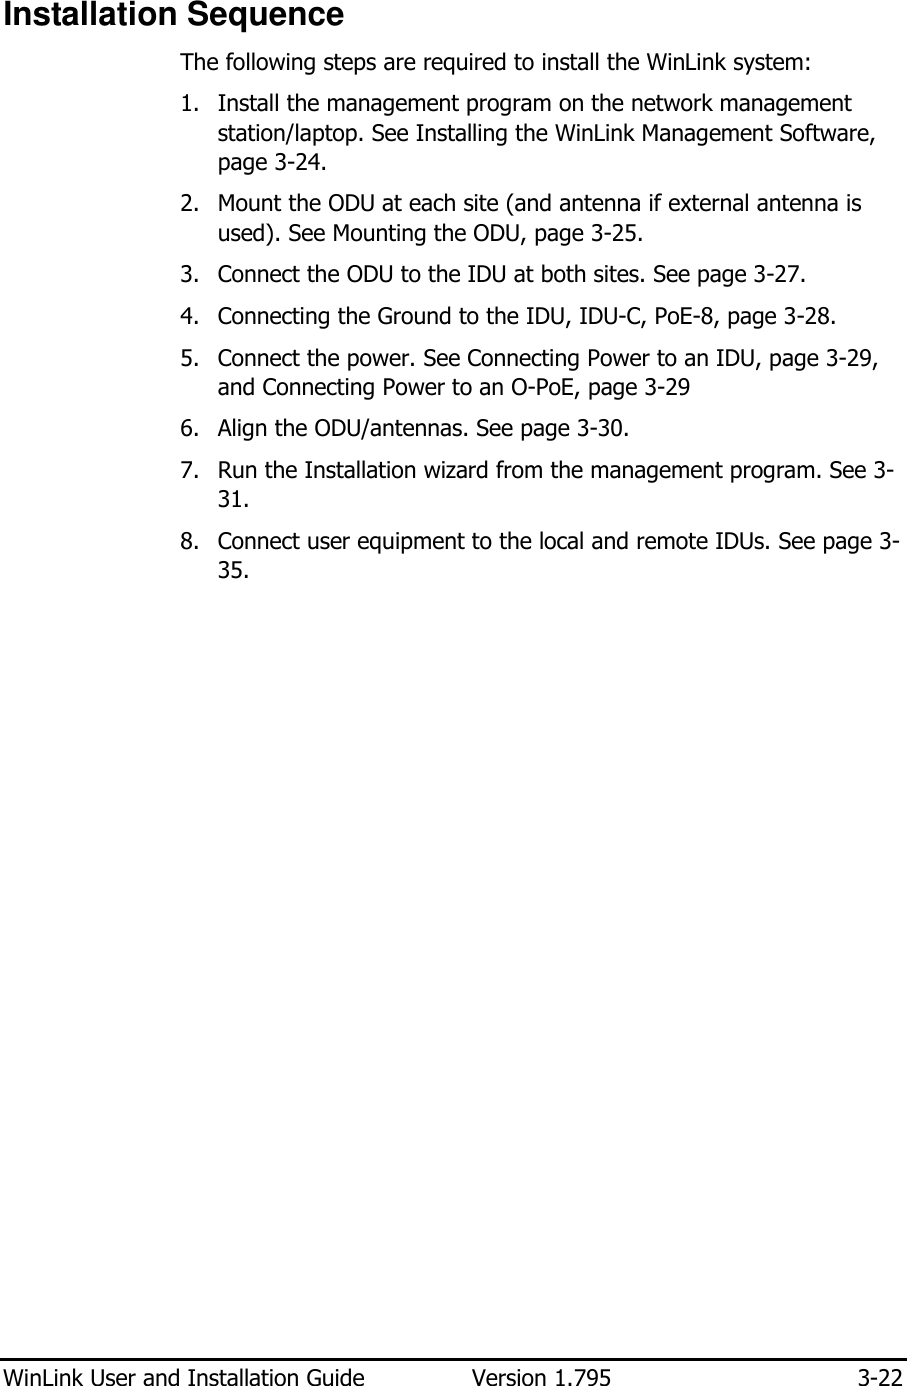  WinLink User and Installation Guide  Version 1.795  3-22  Installation Sequence The following steps are required to install the WinLink system: 1. Install the management program on the network management station/laptop. See Installing the WinLink Management Software, page 3-24.  2. Mount the ODU at each site (and antenna if external antenna is used). See Mounting the ODU, page 3-25.  3. Connect the ODU to the IDU at both sites. See page 3-27.  4. Connecting the Ground to the IDU, IDU-C, PoE-8, page 3-28. 5. Connect the power. See Connecting Power to an IDU, page 3-29, and Connecting Power to an O-PoE, page 3-29 6. Align the ODU/antennas. See page 3-30. 7. Run the Installation wizard from the management program. See 3-31. 8. Connect user equipment to the local and remote IDUs. See page 3-35.     